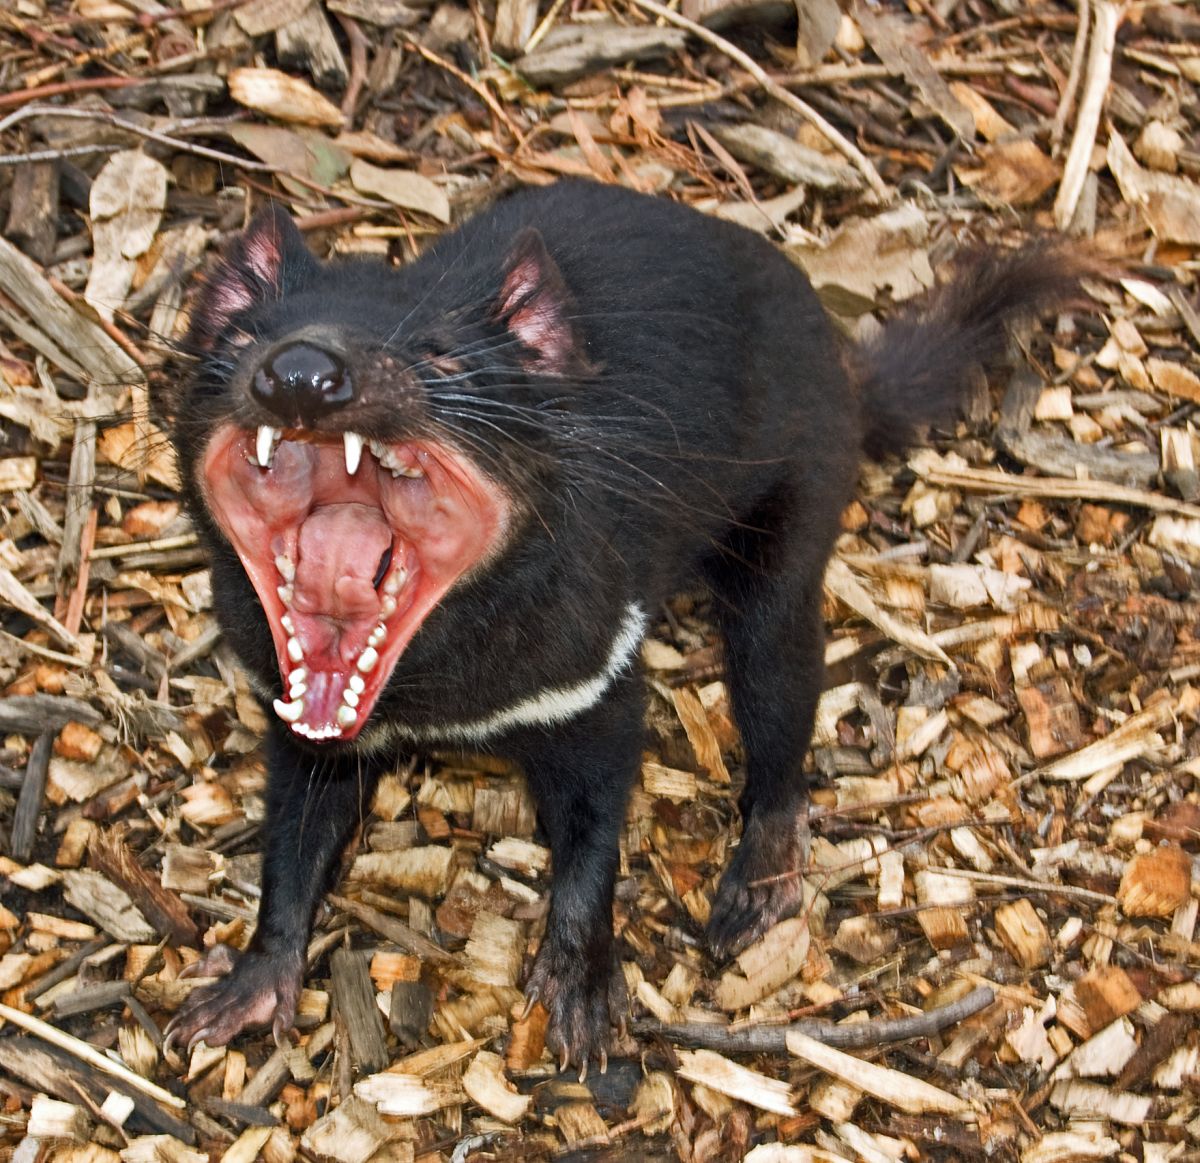 Tasmanian devils learning to live with DFTD - Research Division